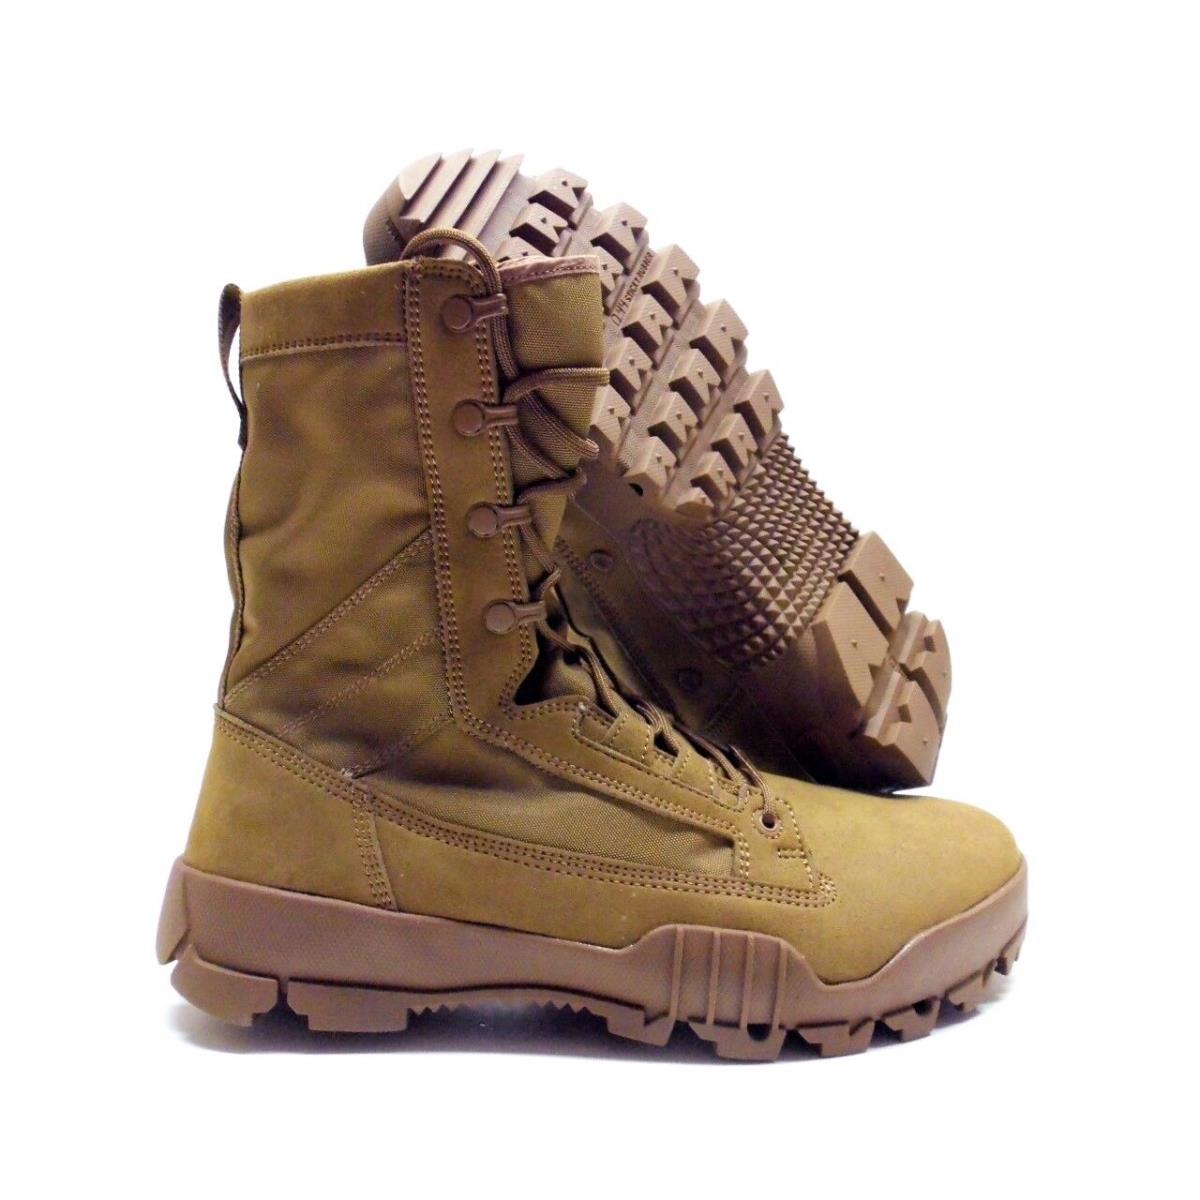 Nike Sfb Jungle 8 Special Field Boots Coyote/coyote Size Men`s 15 631372-990